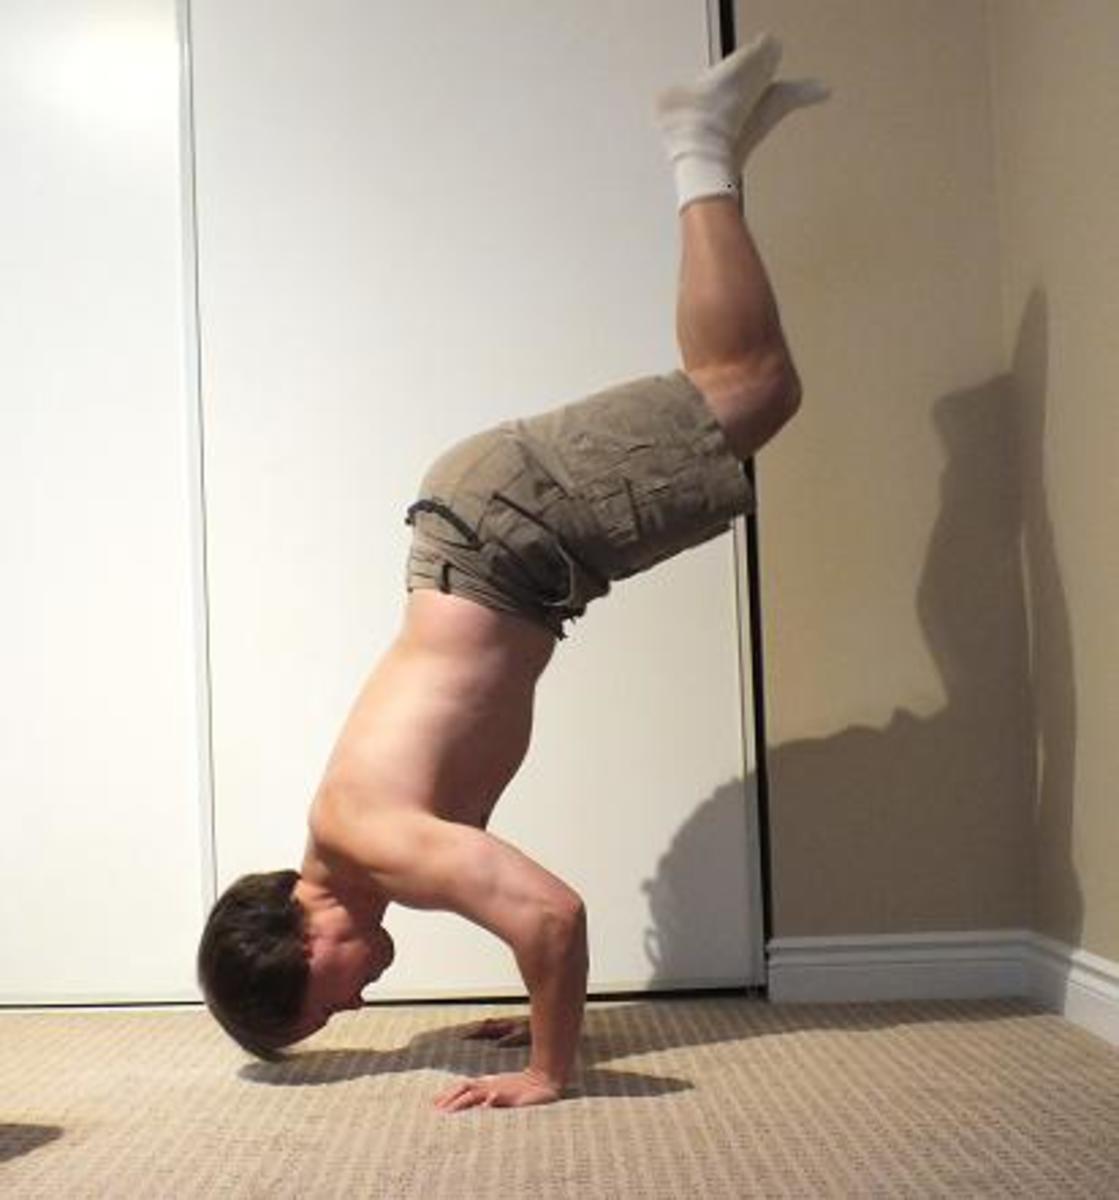 I look forward to doing handstand push ups.